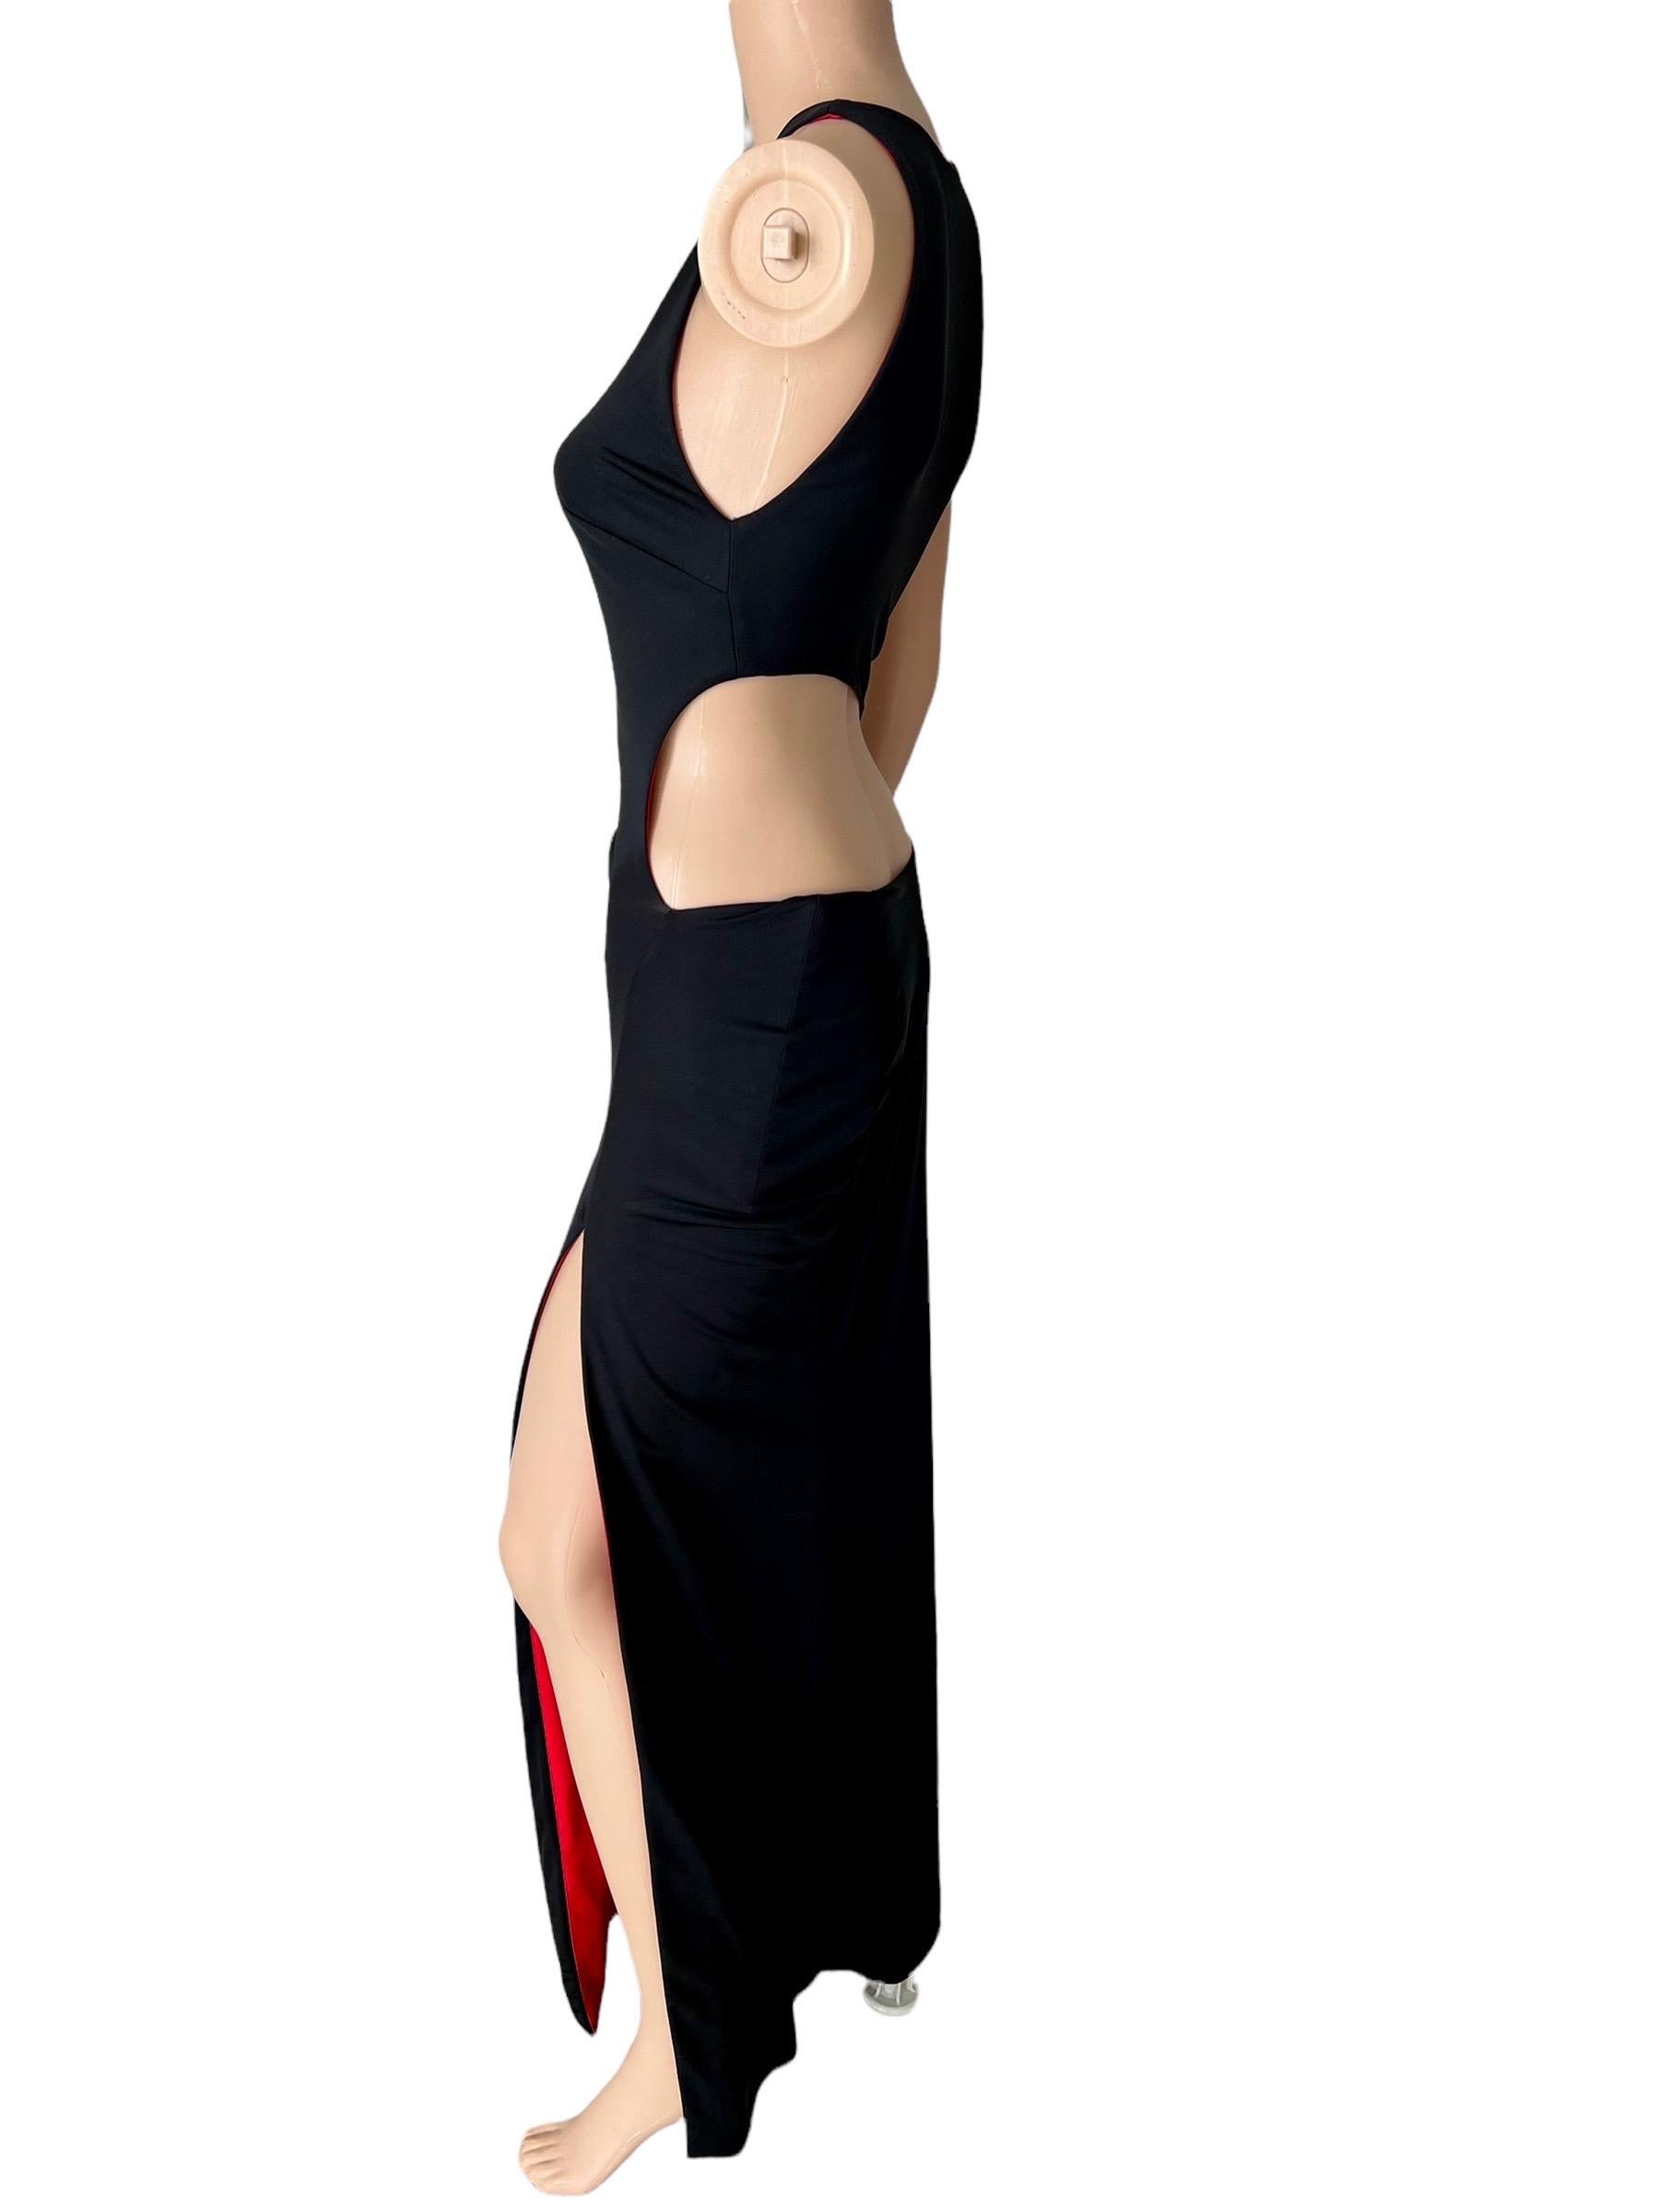 Gianni Versace S/S 1998 Runway Vintage Wet Liquid Look Cutout Evening Dress Gown IT 38

Gianni Versace black and red lining strapless evening dress featuring high leg slit and a bodycon silhouette. 
